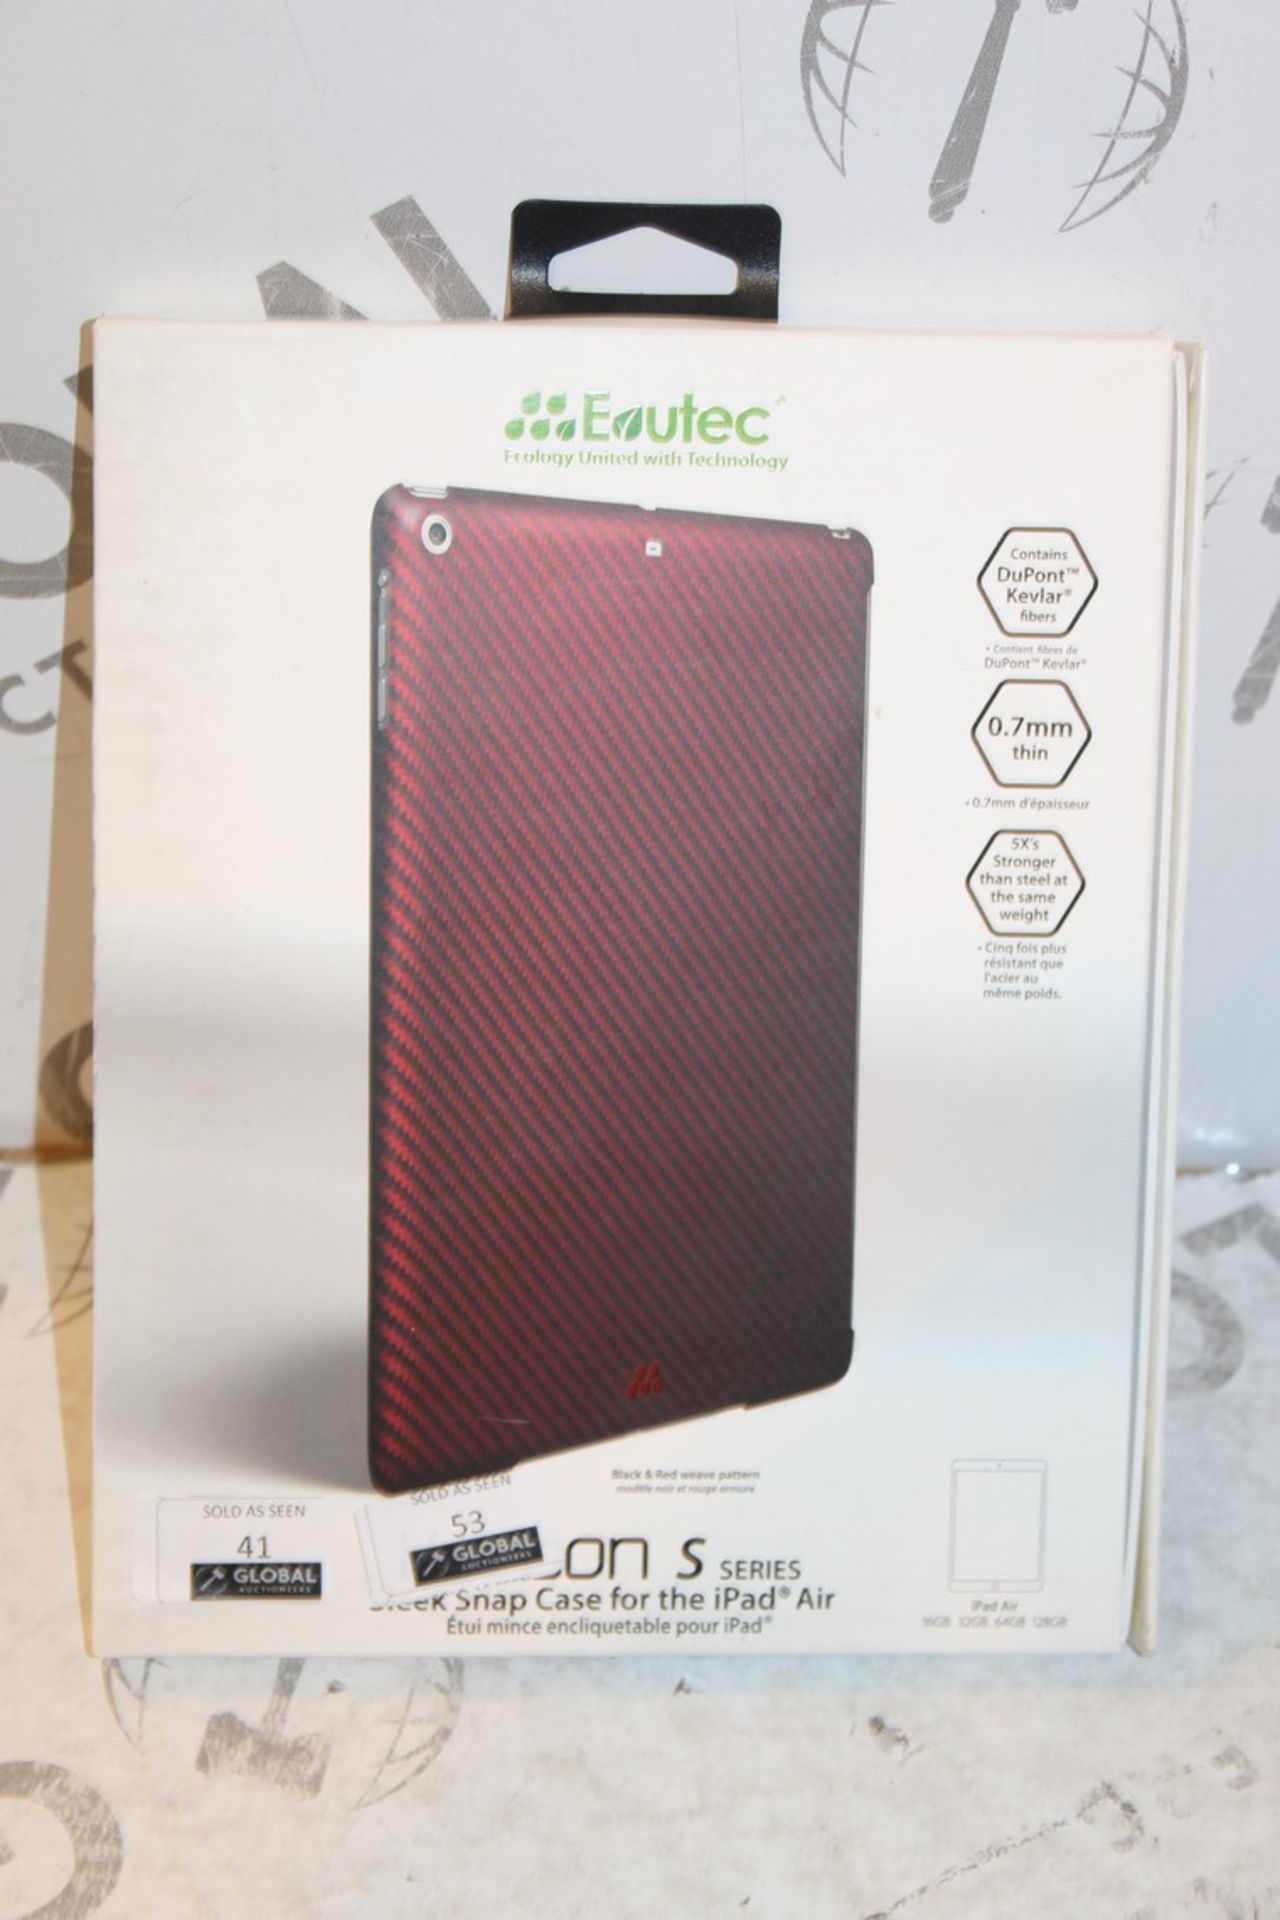 11 Brand New Evutec Carbon S Snap on Cases for Ipad Air Combined RRP £70 (Appraisals Available